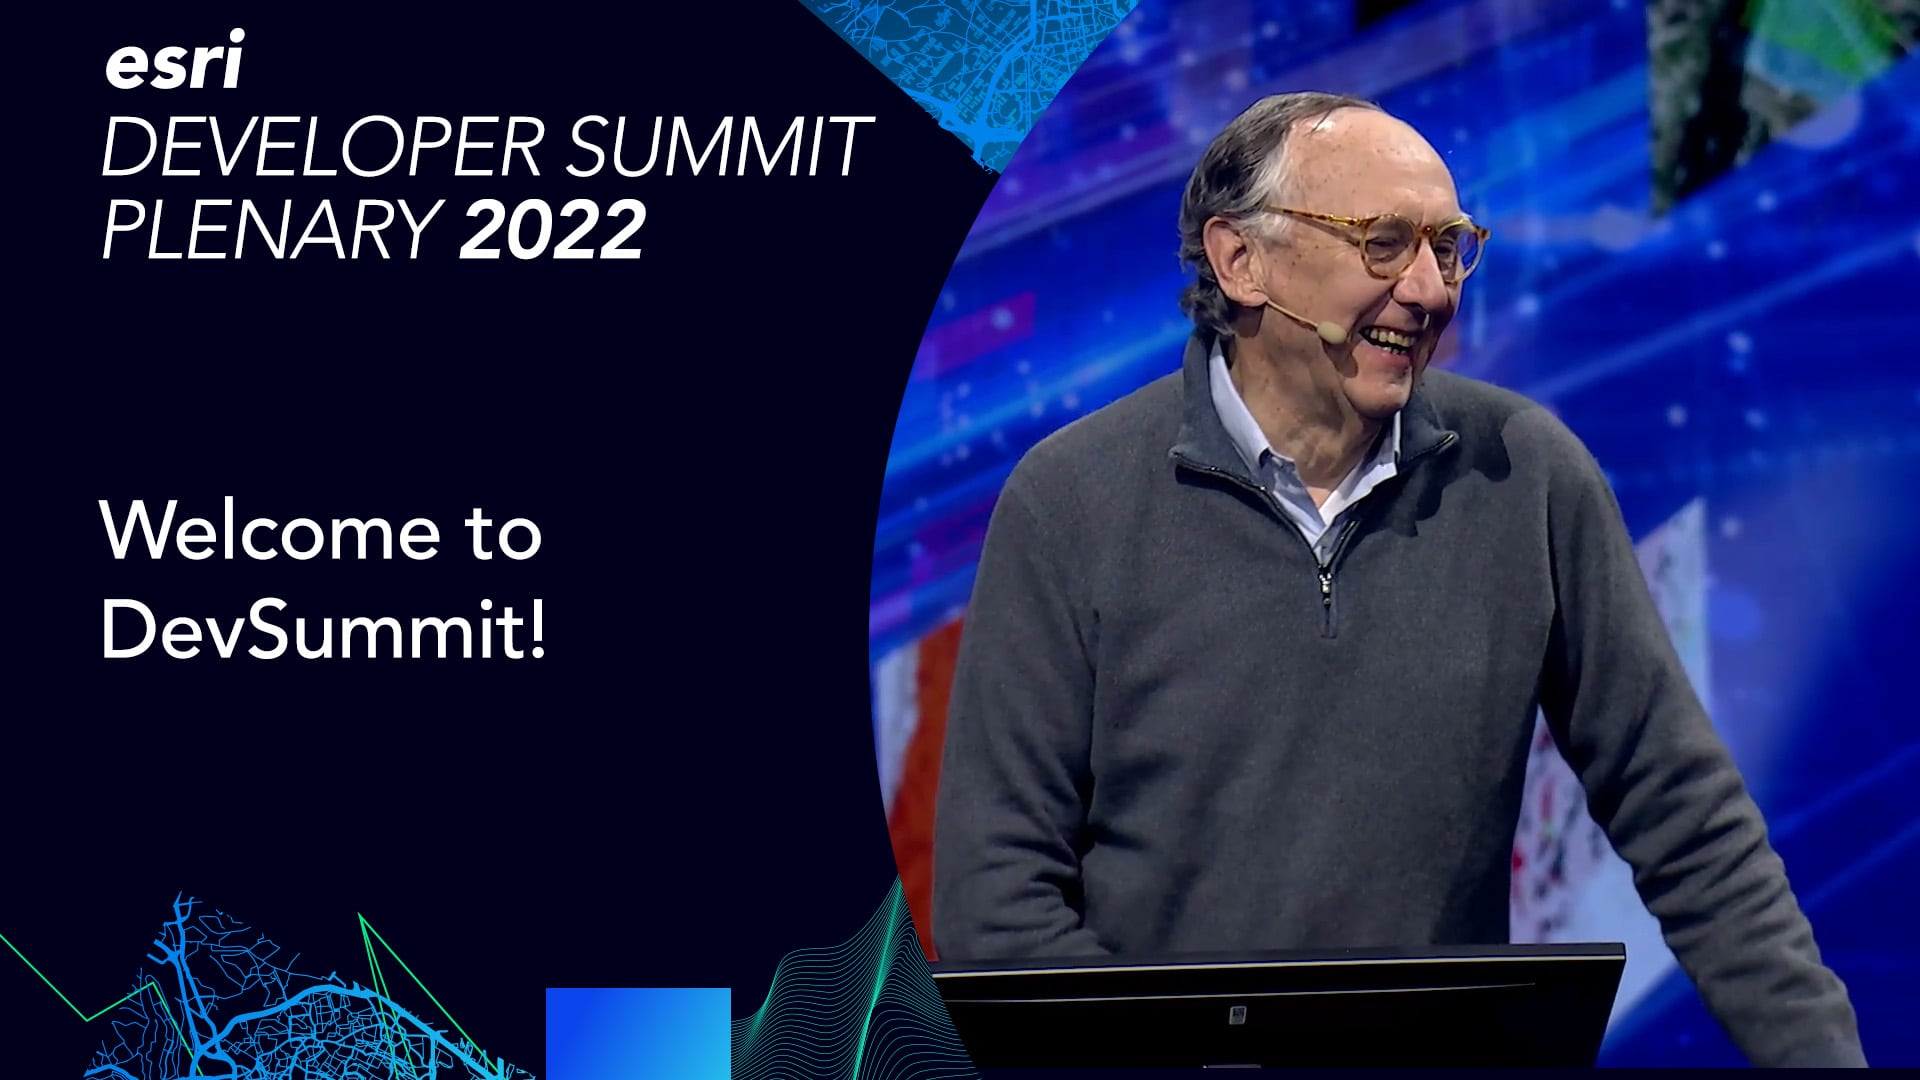 Jack Dangermond smiles while standing at a podium with the words, Esri Developer Summit Plenary 2022 and Welcome to DevSummit to the left